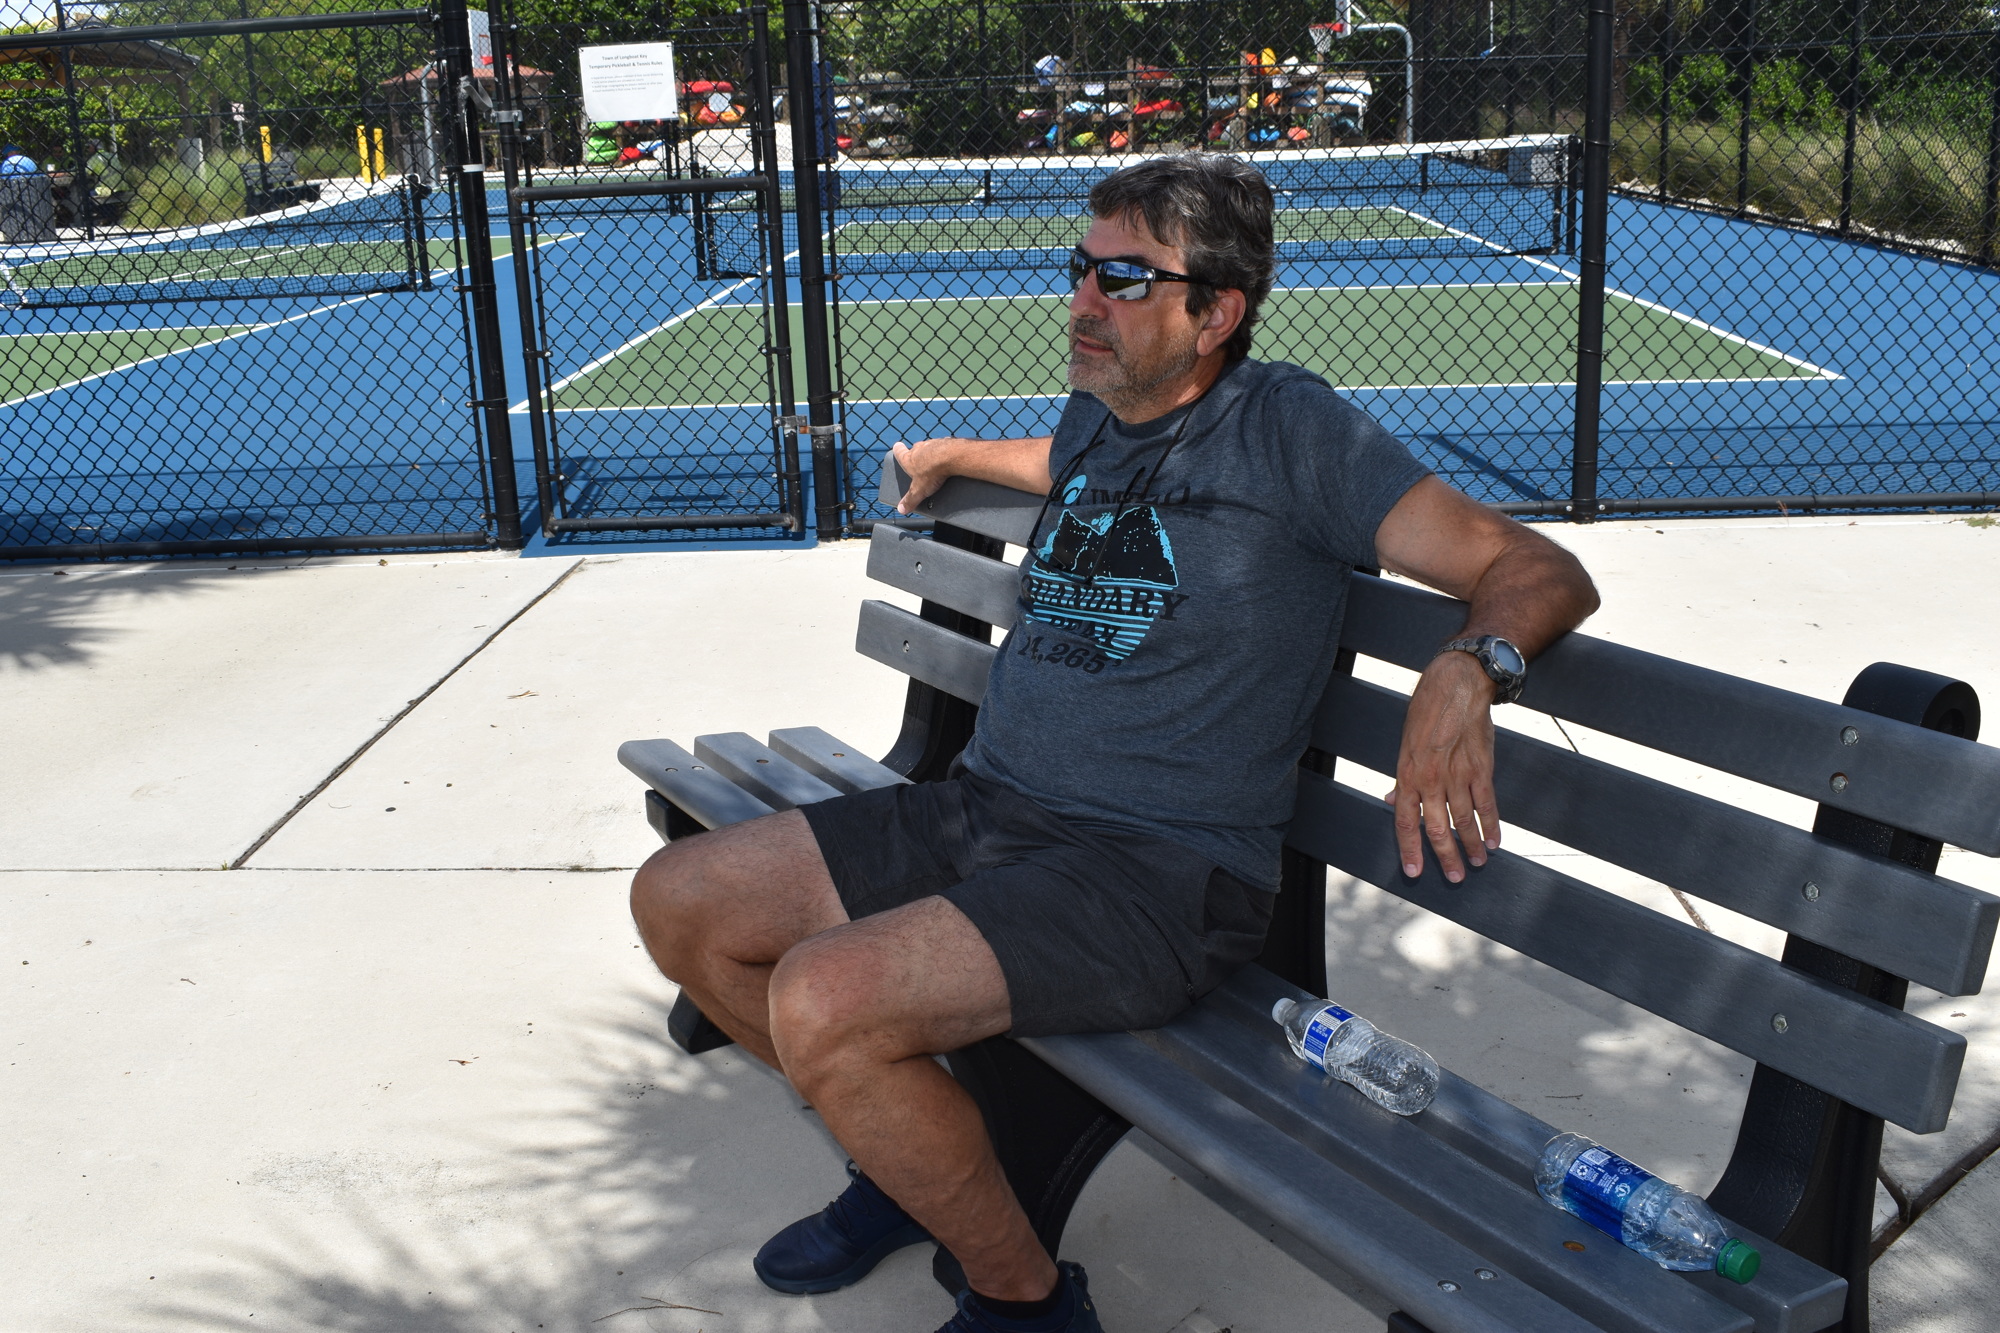 Markos Markosov drove from Bradenton to Longboat Key's Bayfront Park to watch his daughter play tennis.